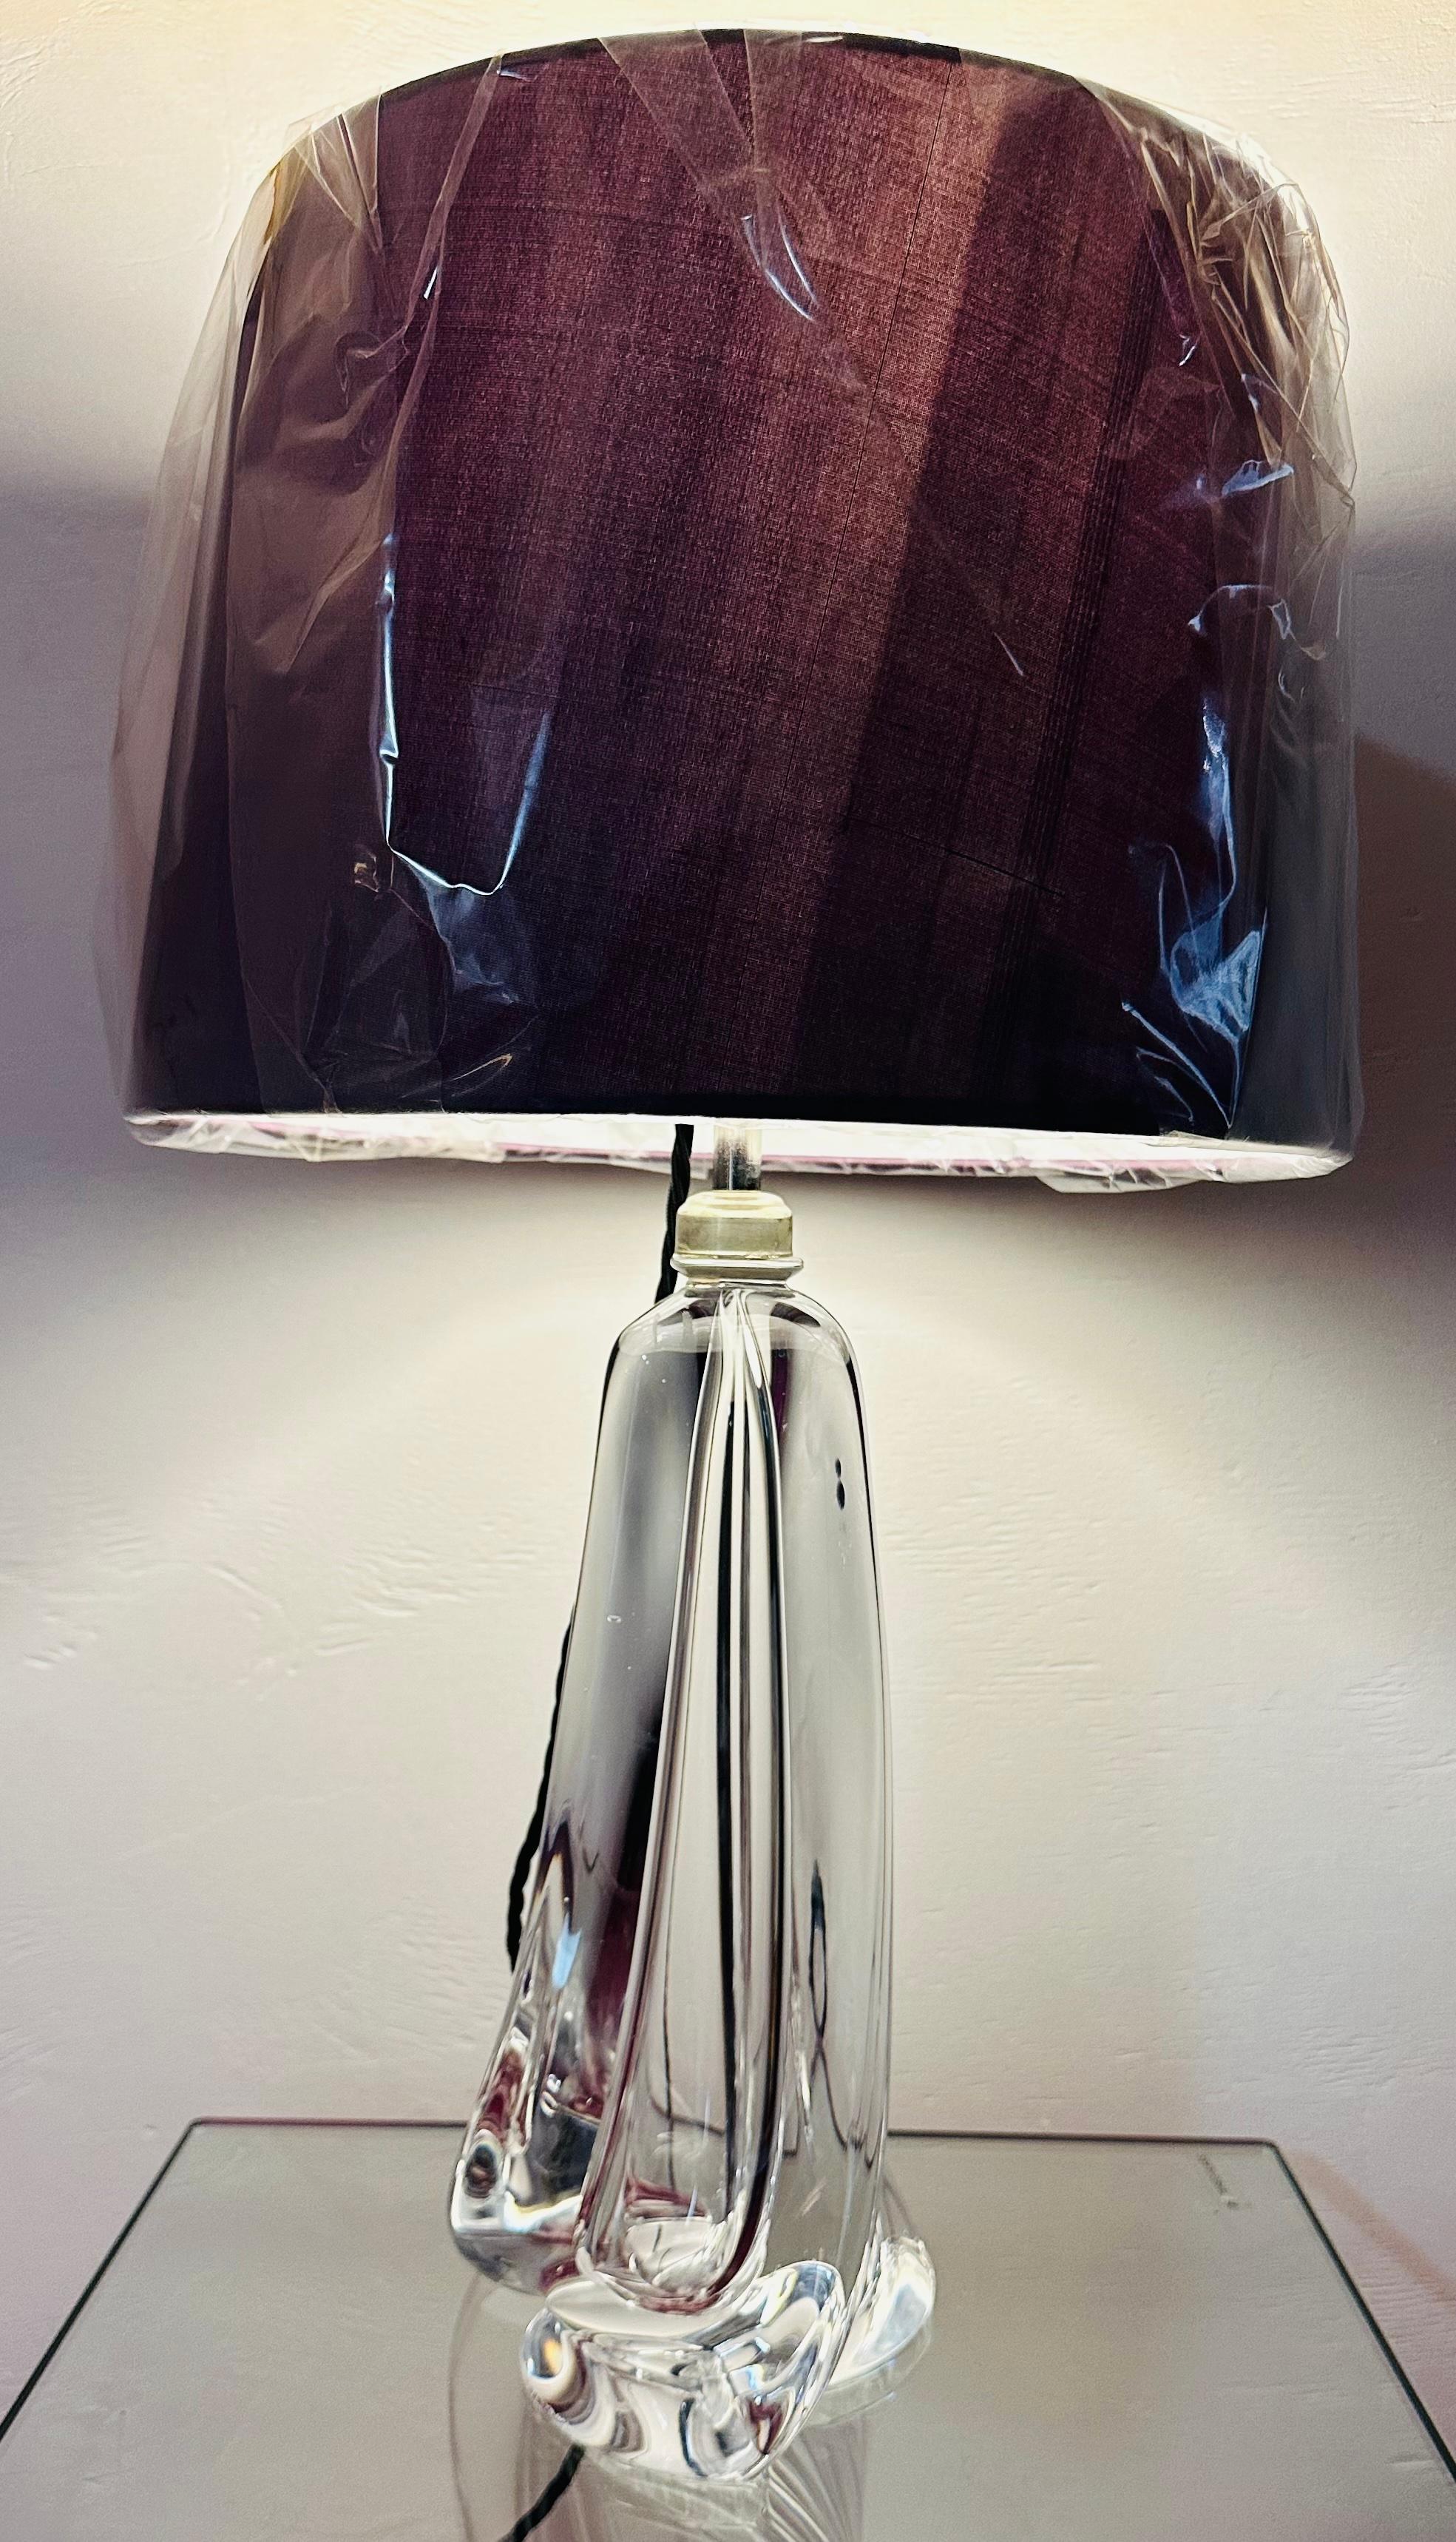 1950s Belgium Val Saint Lambert clear crystal glass table lamp base with a turned elegant tapering form. The lamp is fitted with a polished chrome mounted socket with the on/off switch fitted within it which can be accessed from underneath the